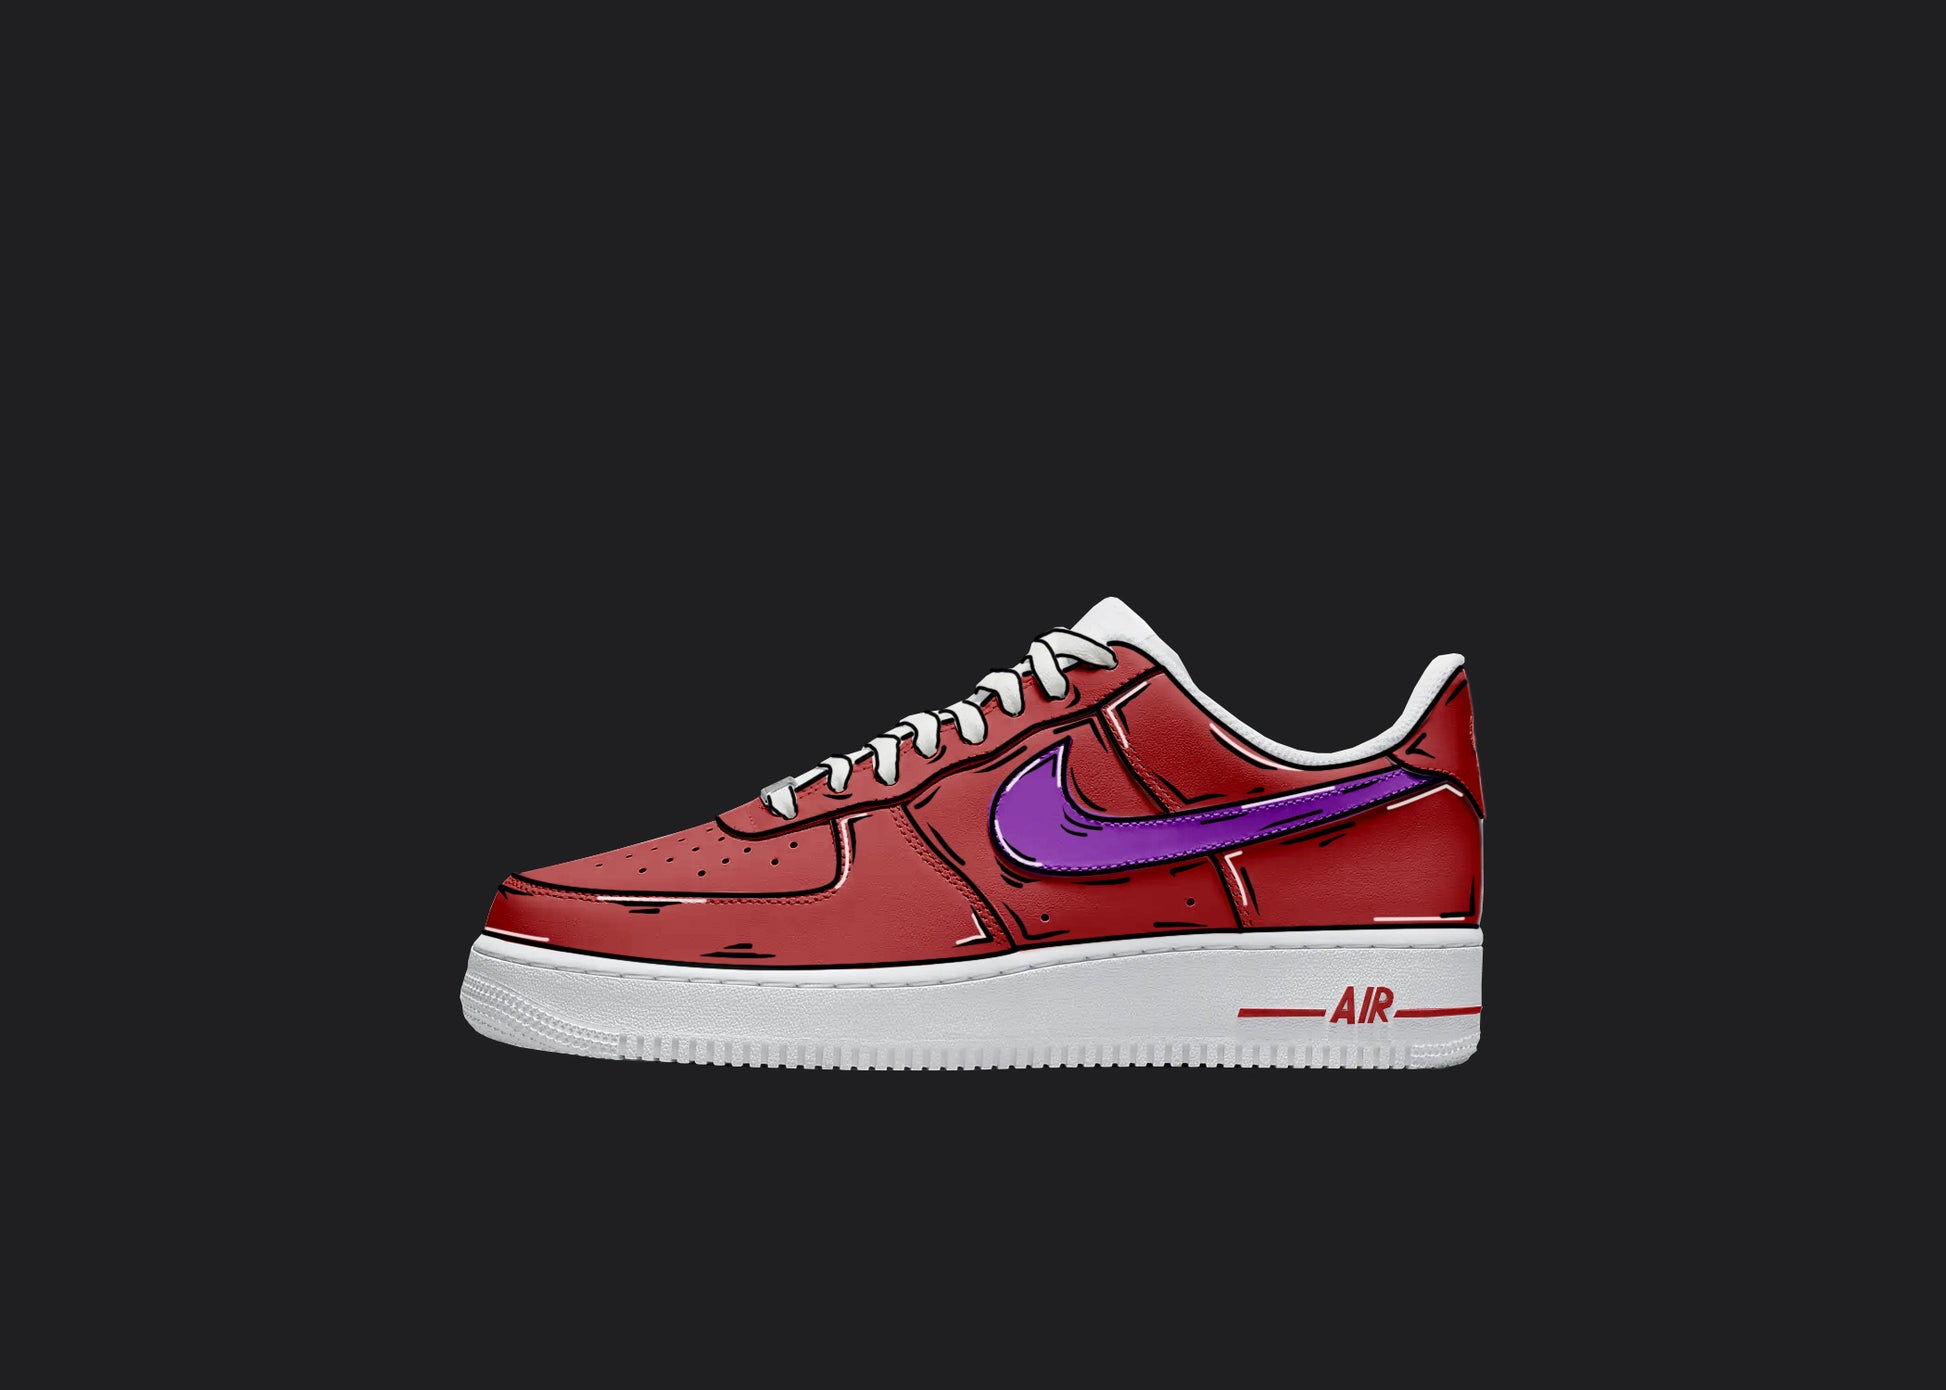 white nike air froce one with a black background hadnpainted wwith all over red and a purple nike swoosh featuring custom hand painted cartoon details all over the colors, laces and sole are white